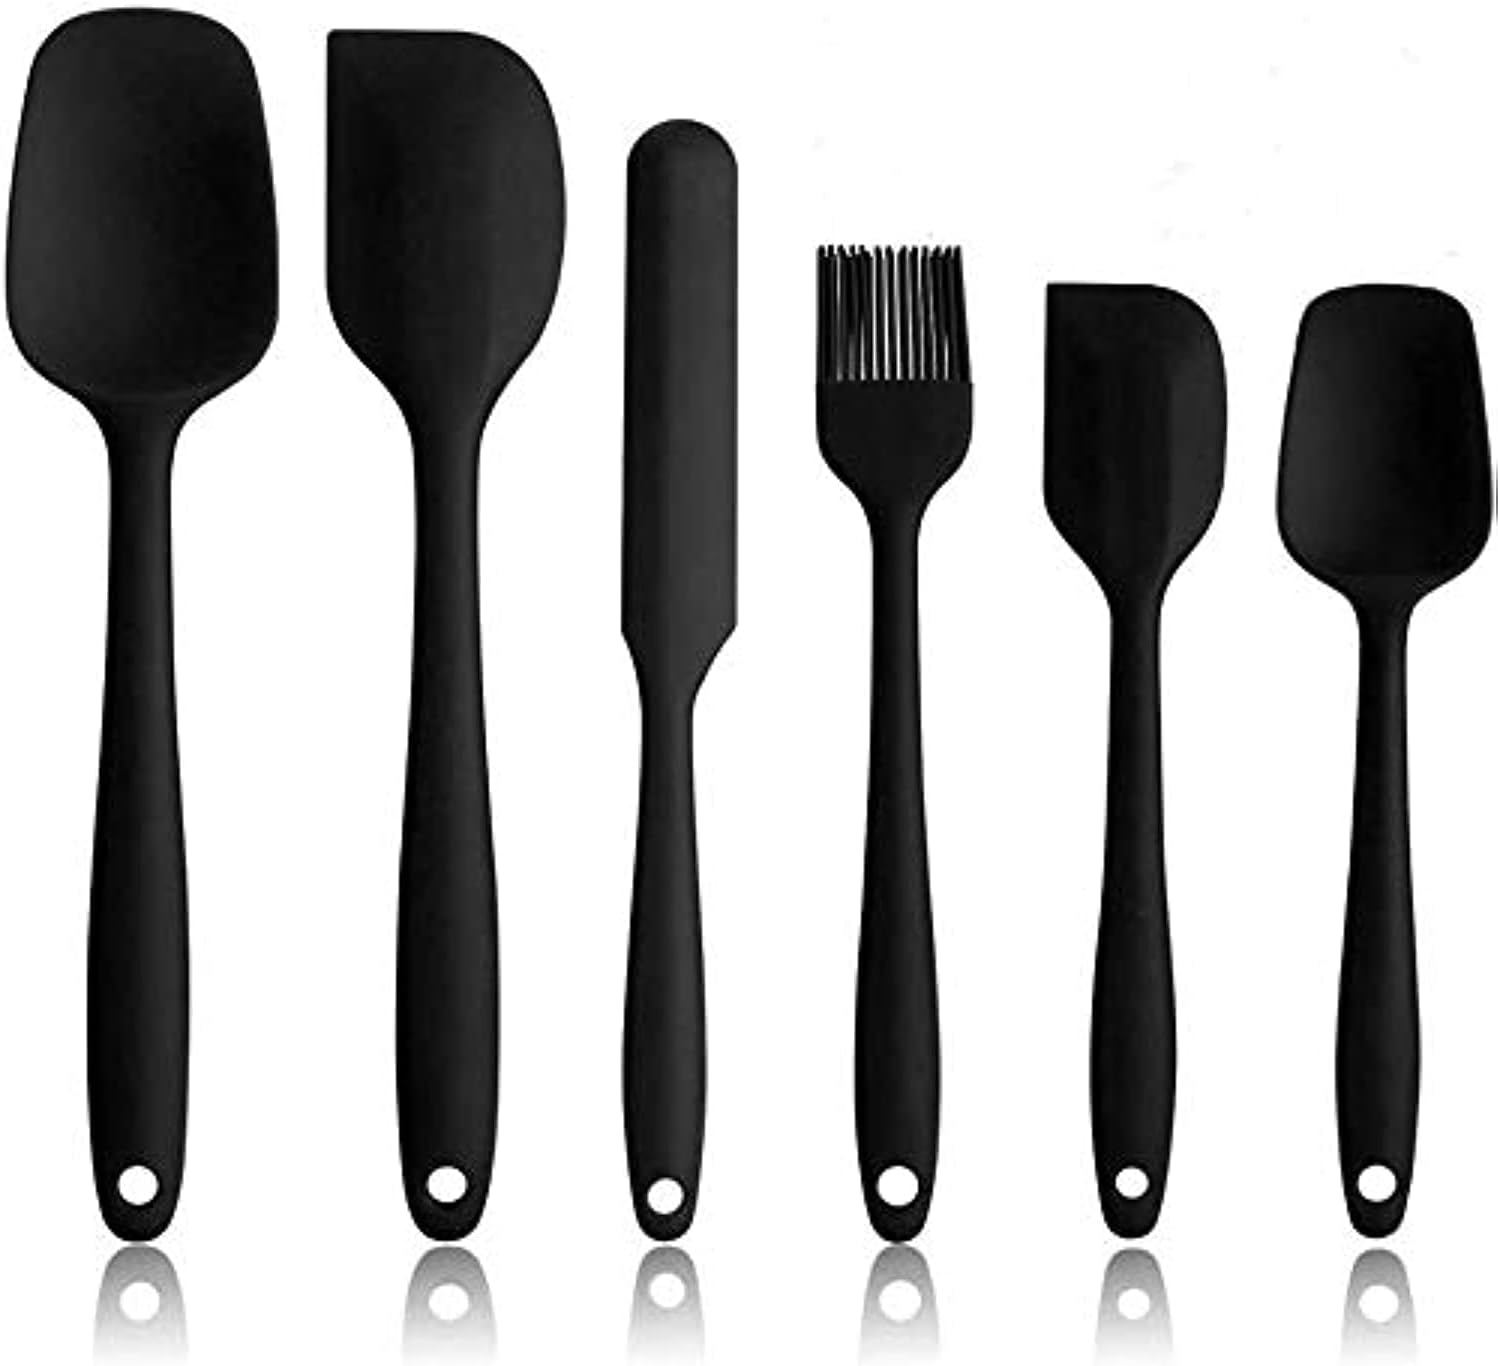 Sky-Touch Silicone Spatula Set - 6 Piece Non-Stick Rubber Spatula Set, Heat-Resistant Spatula Kitchen Utensils Set For Cooking, Baking And Mixing